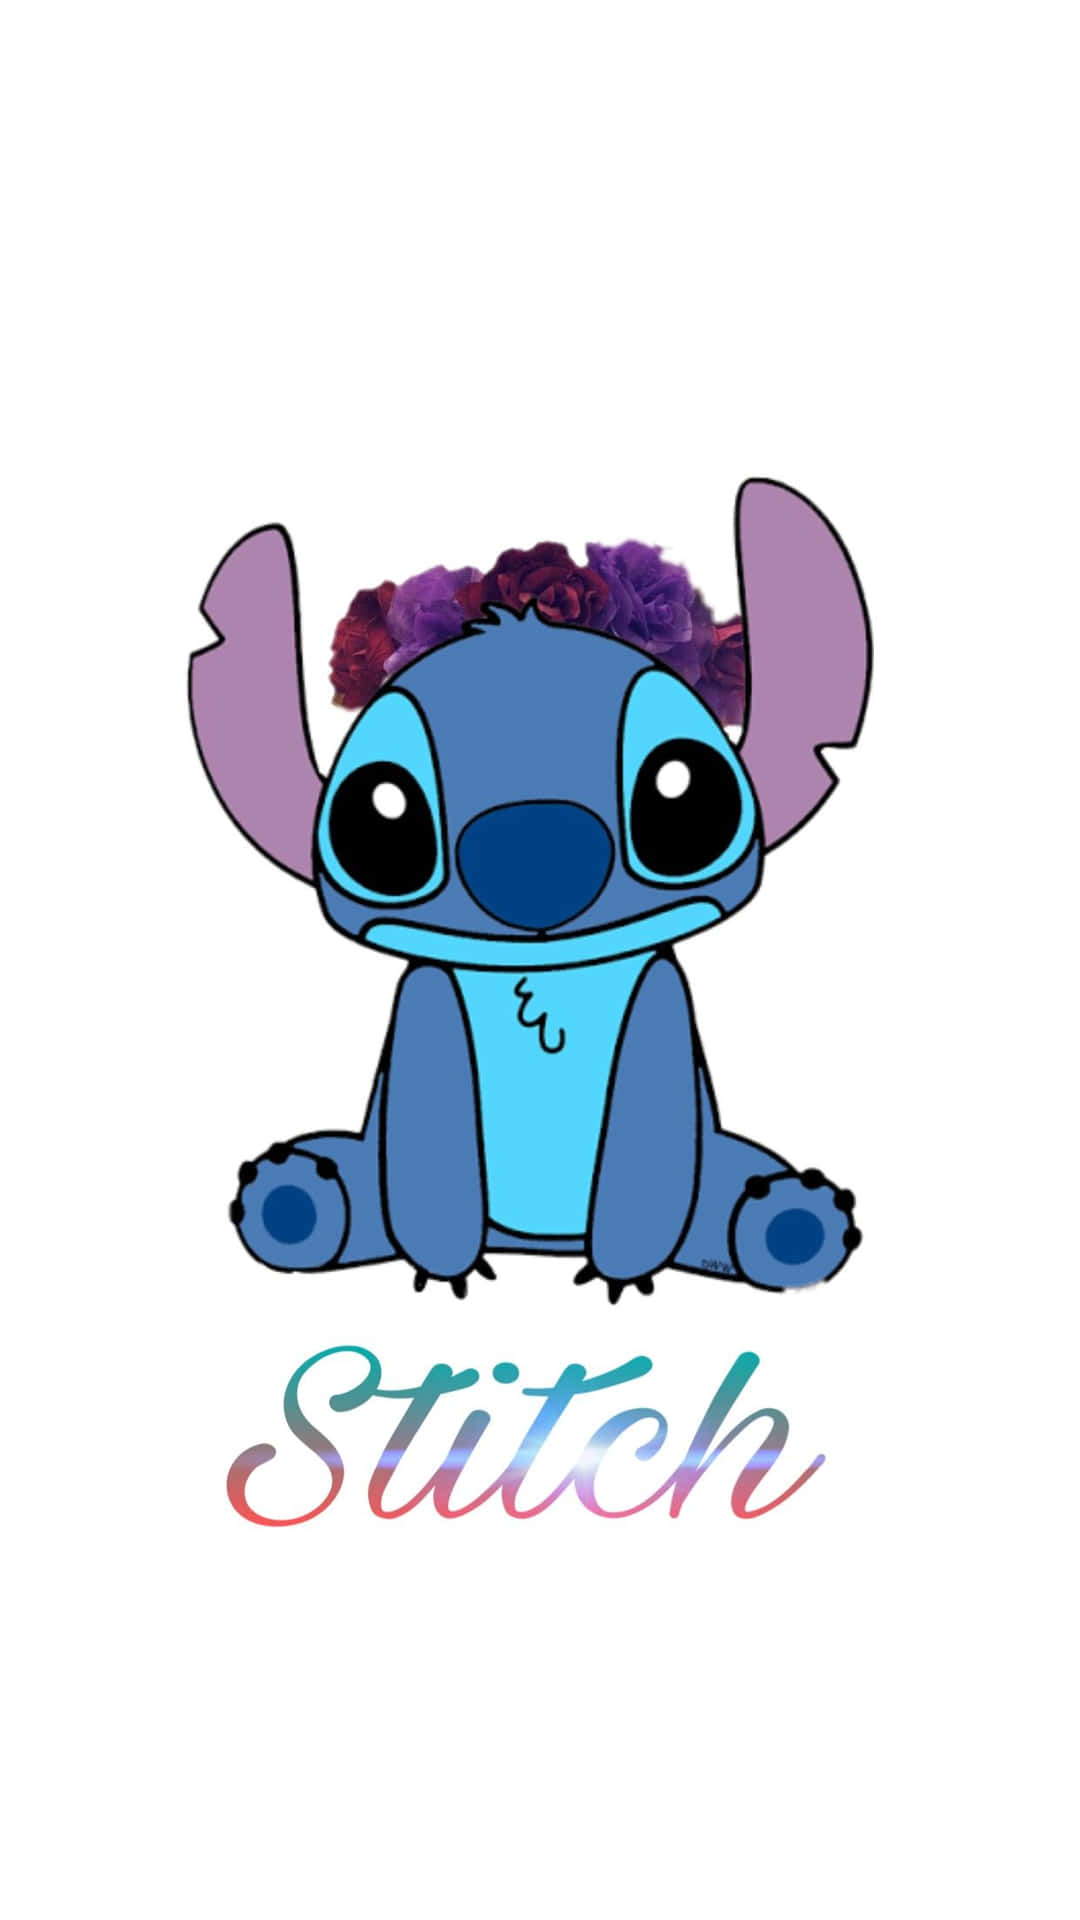 Adorable Baby Stitch having fun playing with a ball Wallpaper